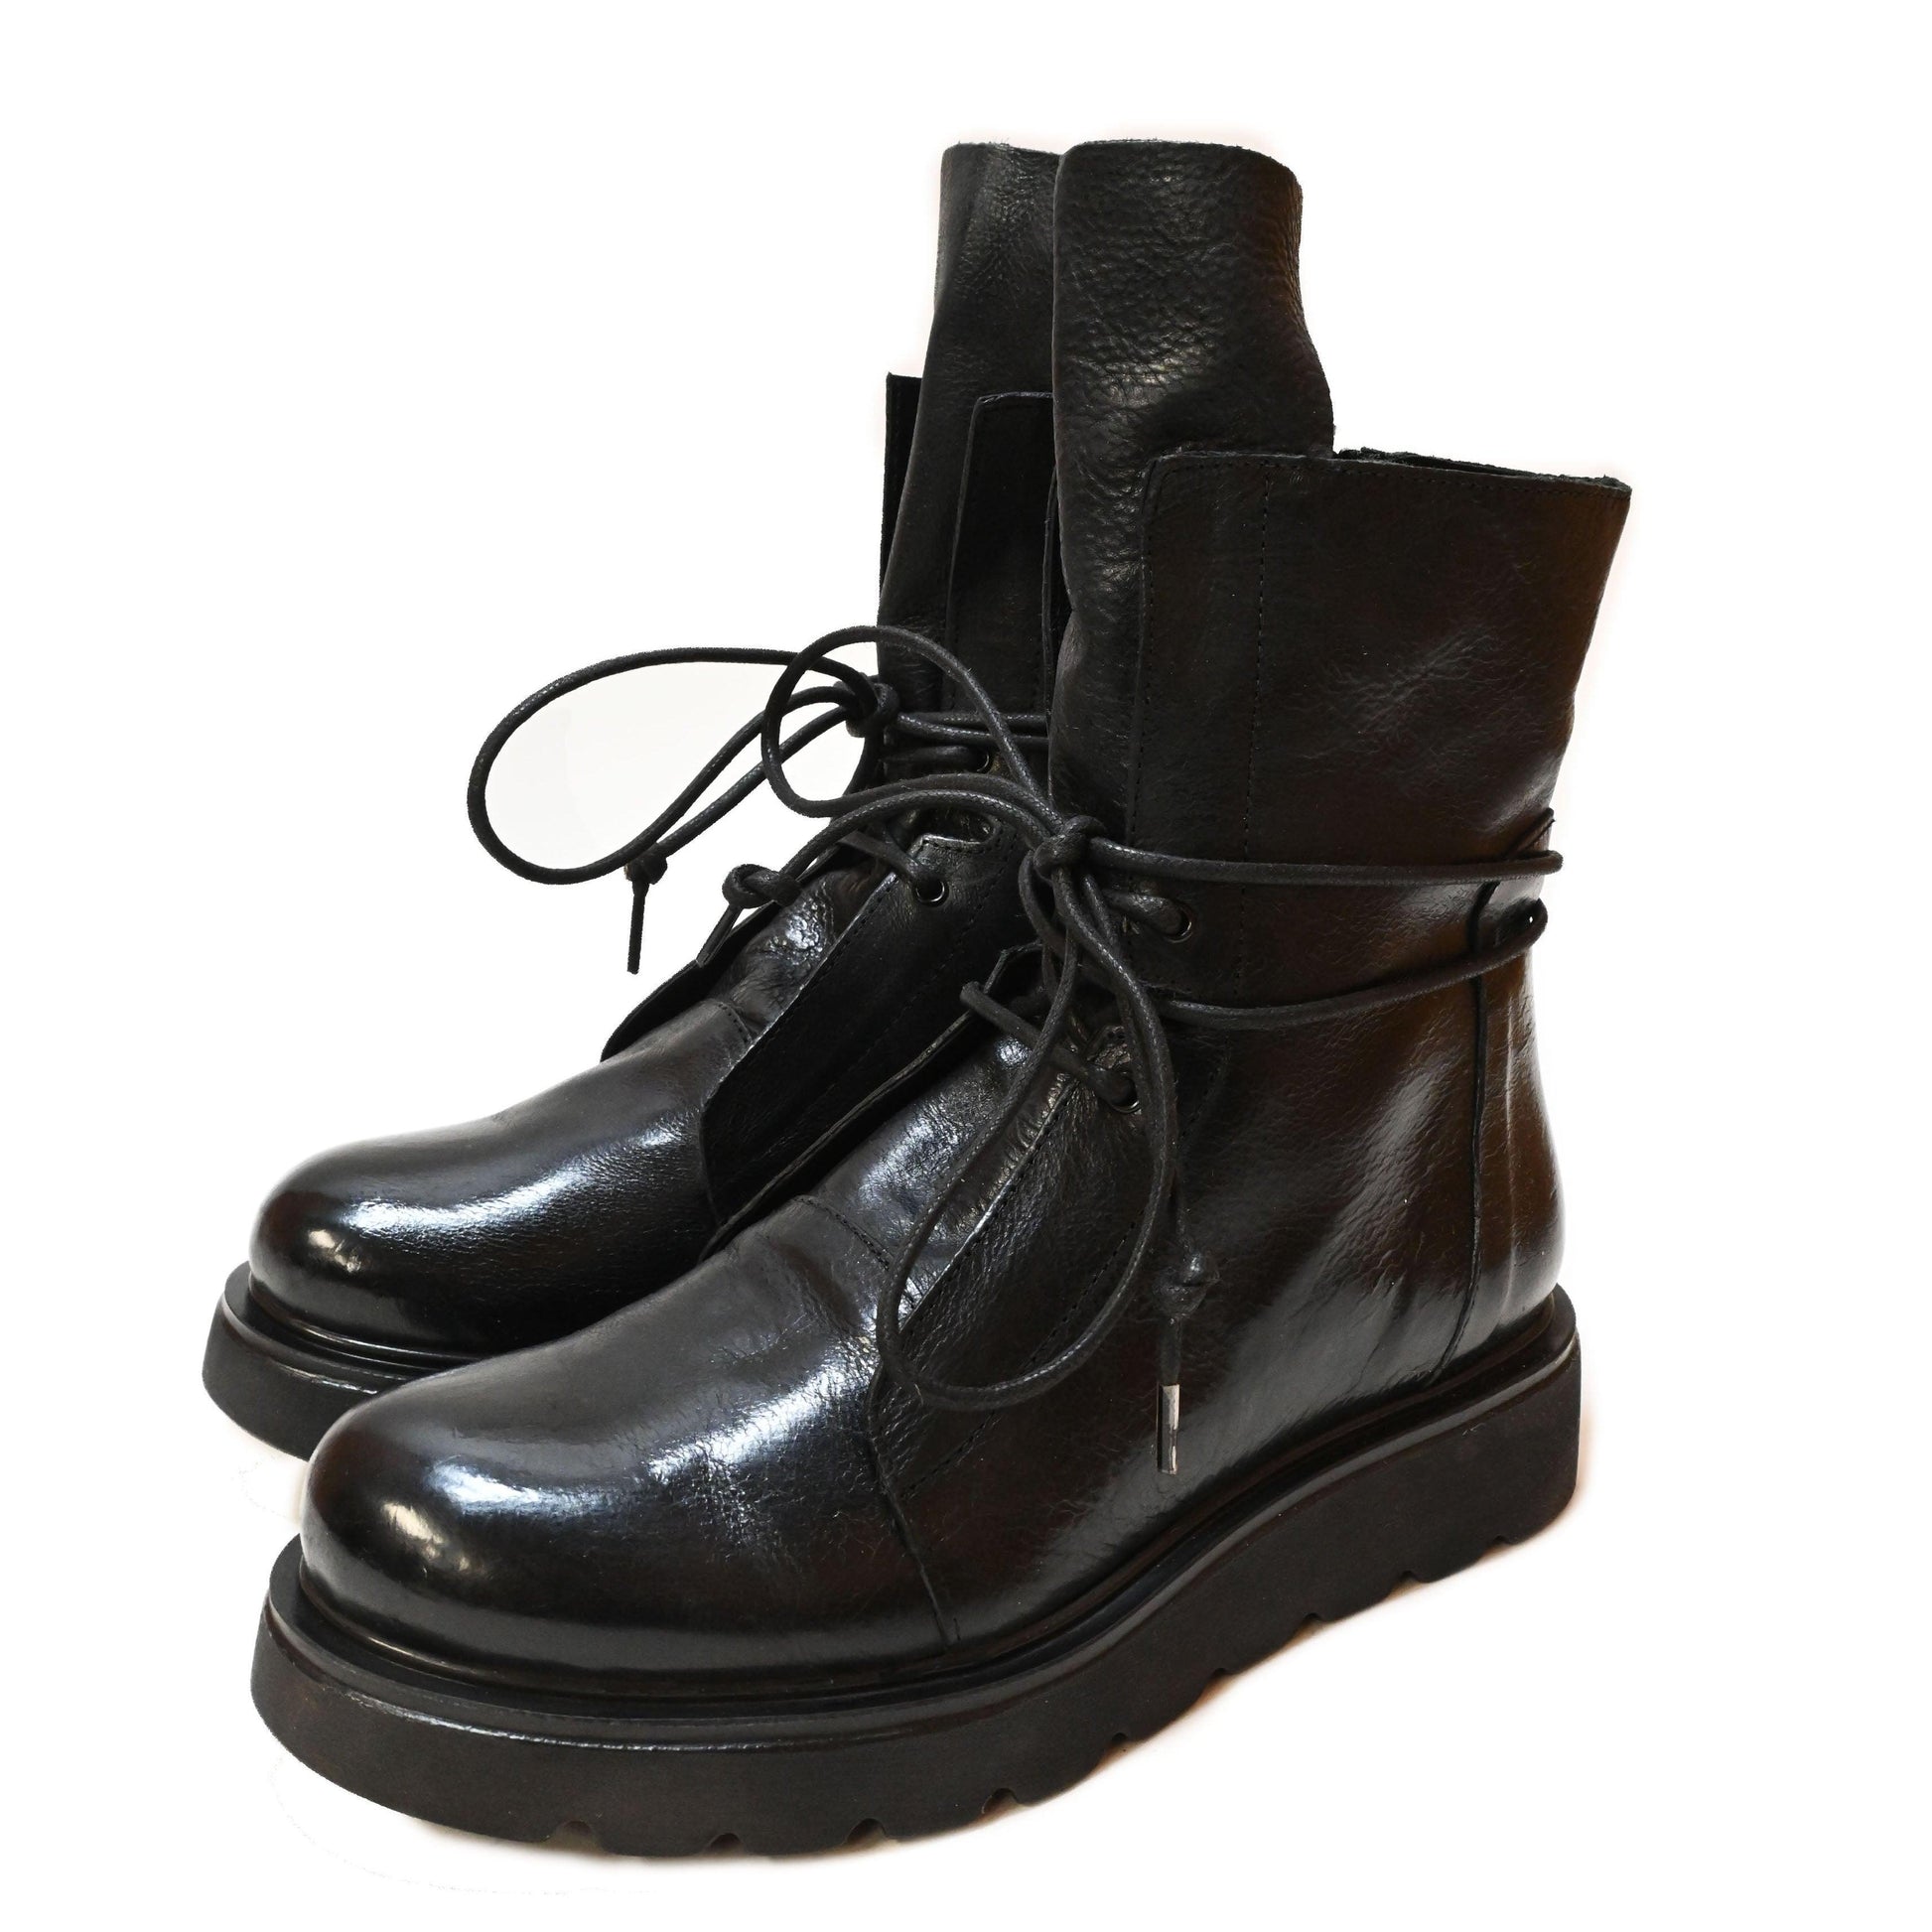 RICH 04 - amphibian ankle boots leather BLACK - History541